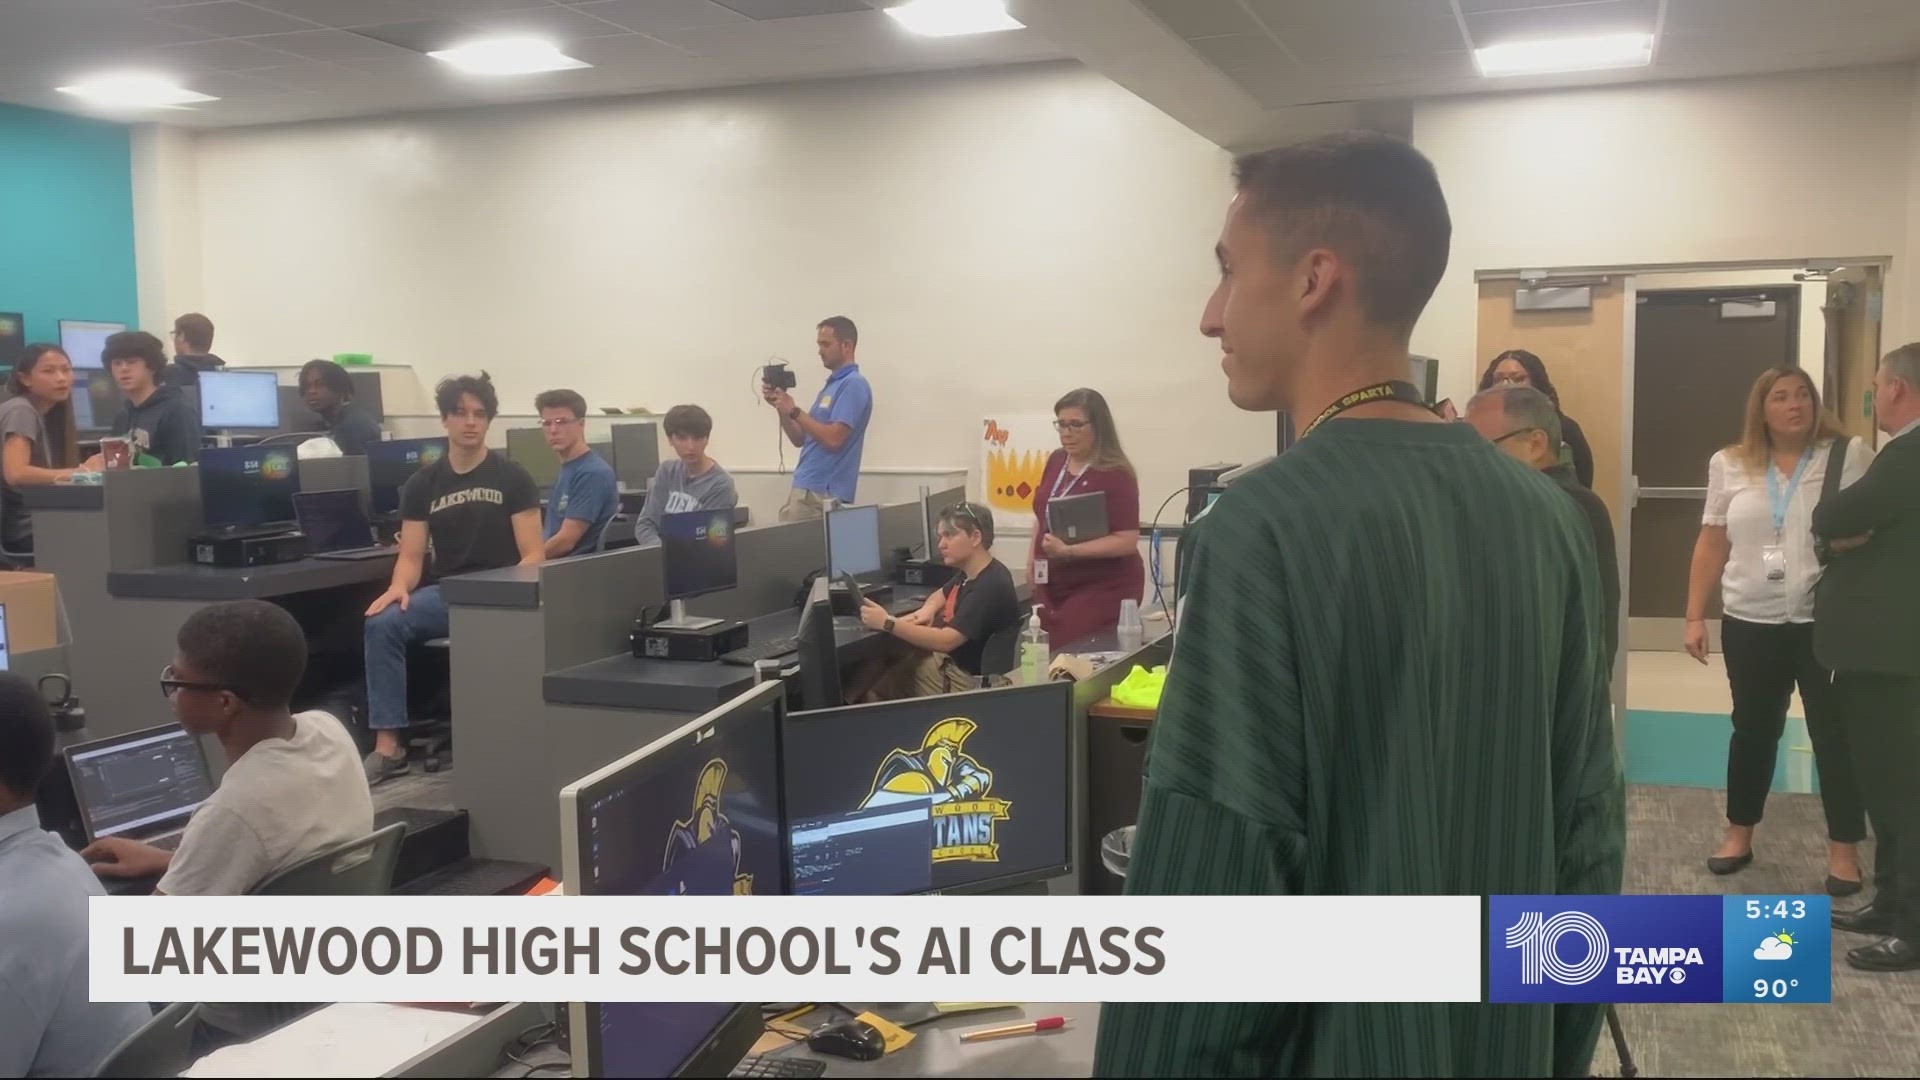 The technology surrounding artificial intelligence is new and changing. Students at a St. Pete High School are learning how it can be used and applied.